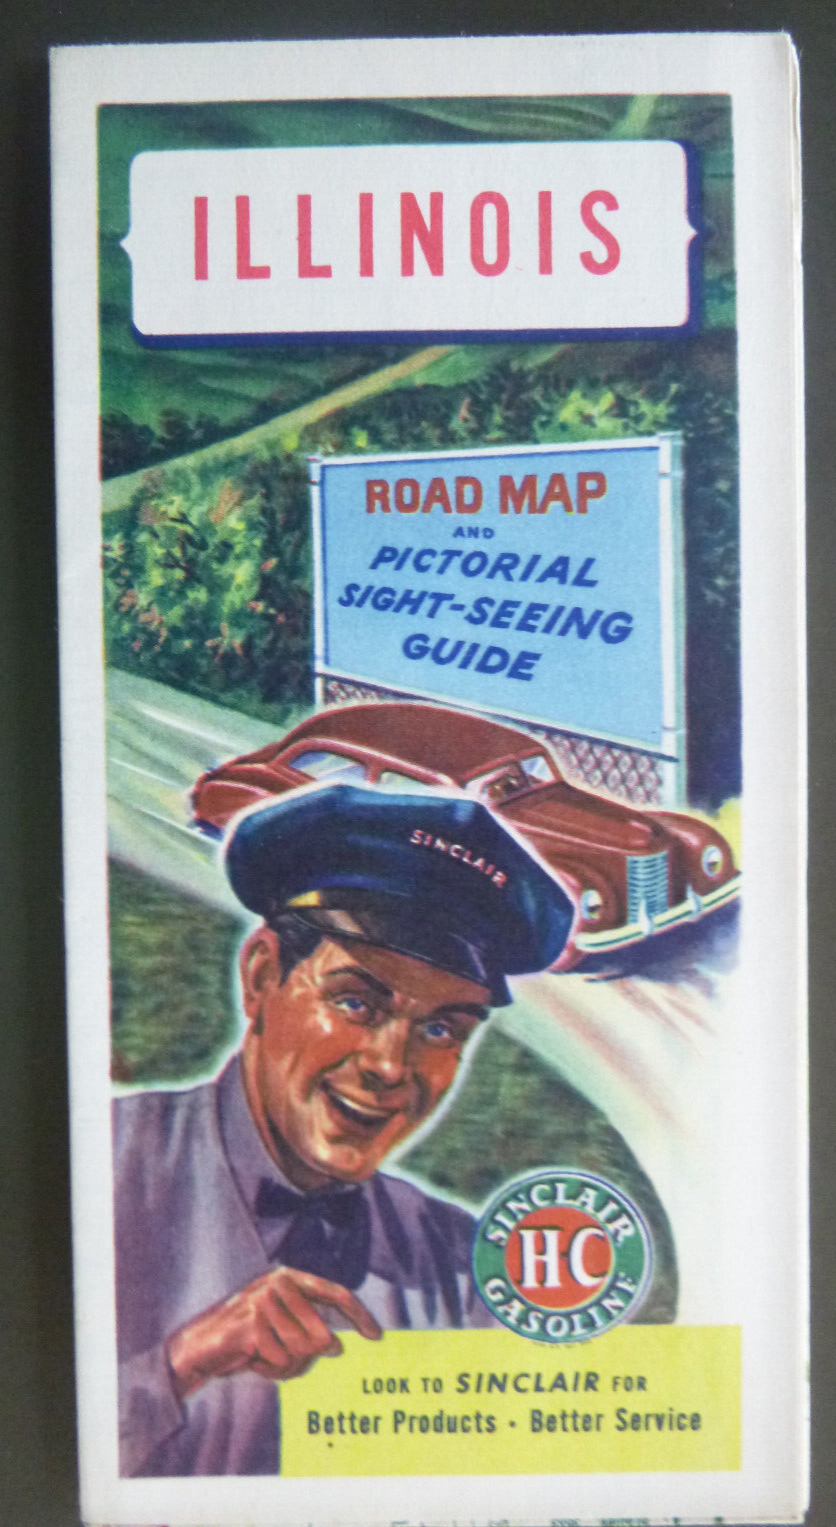 1946 Illinois  road map Sinclair gas oil route 66 pictoral guide